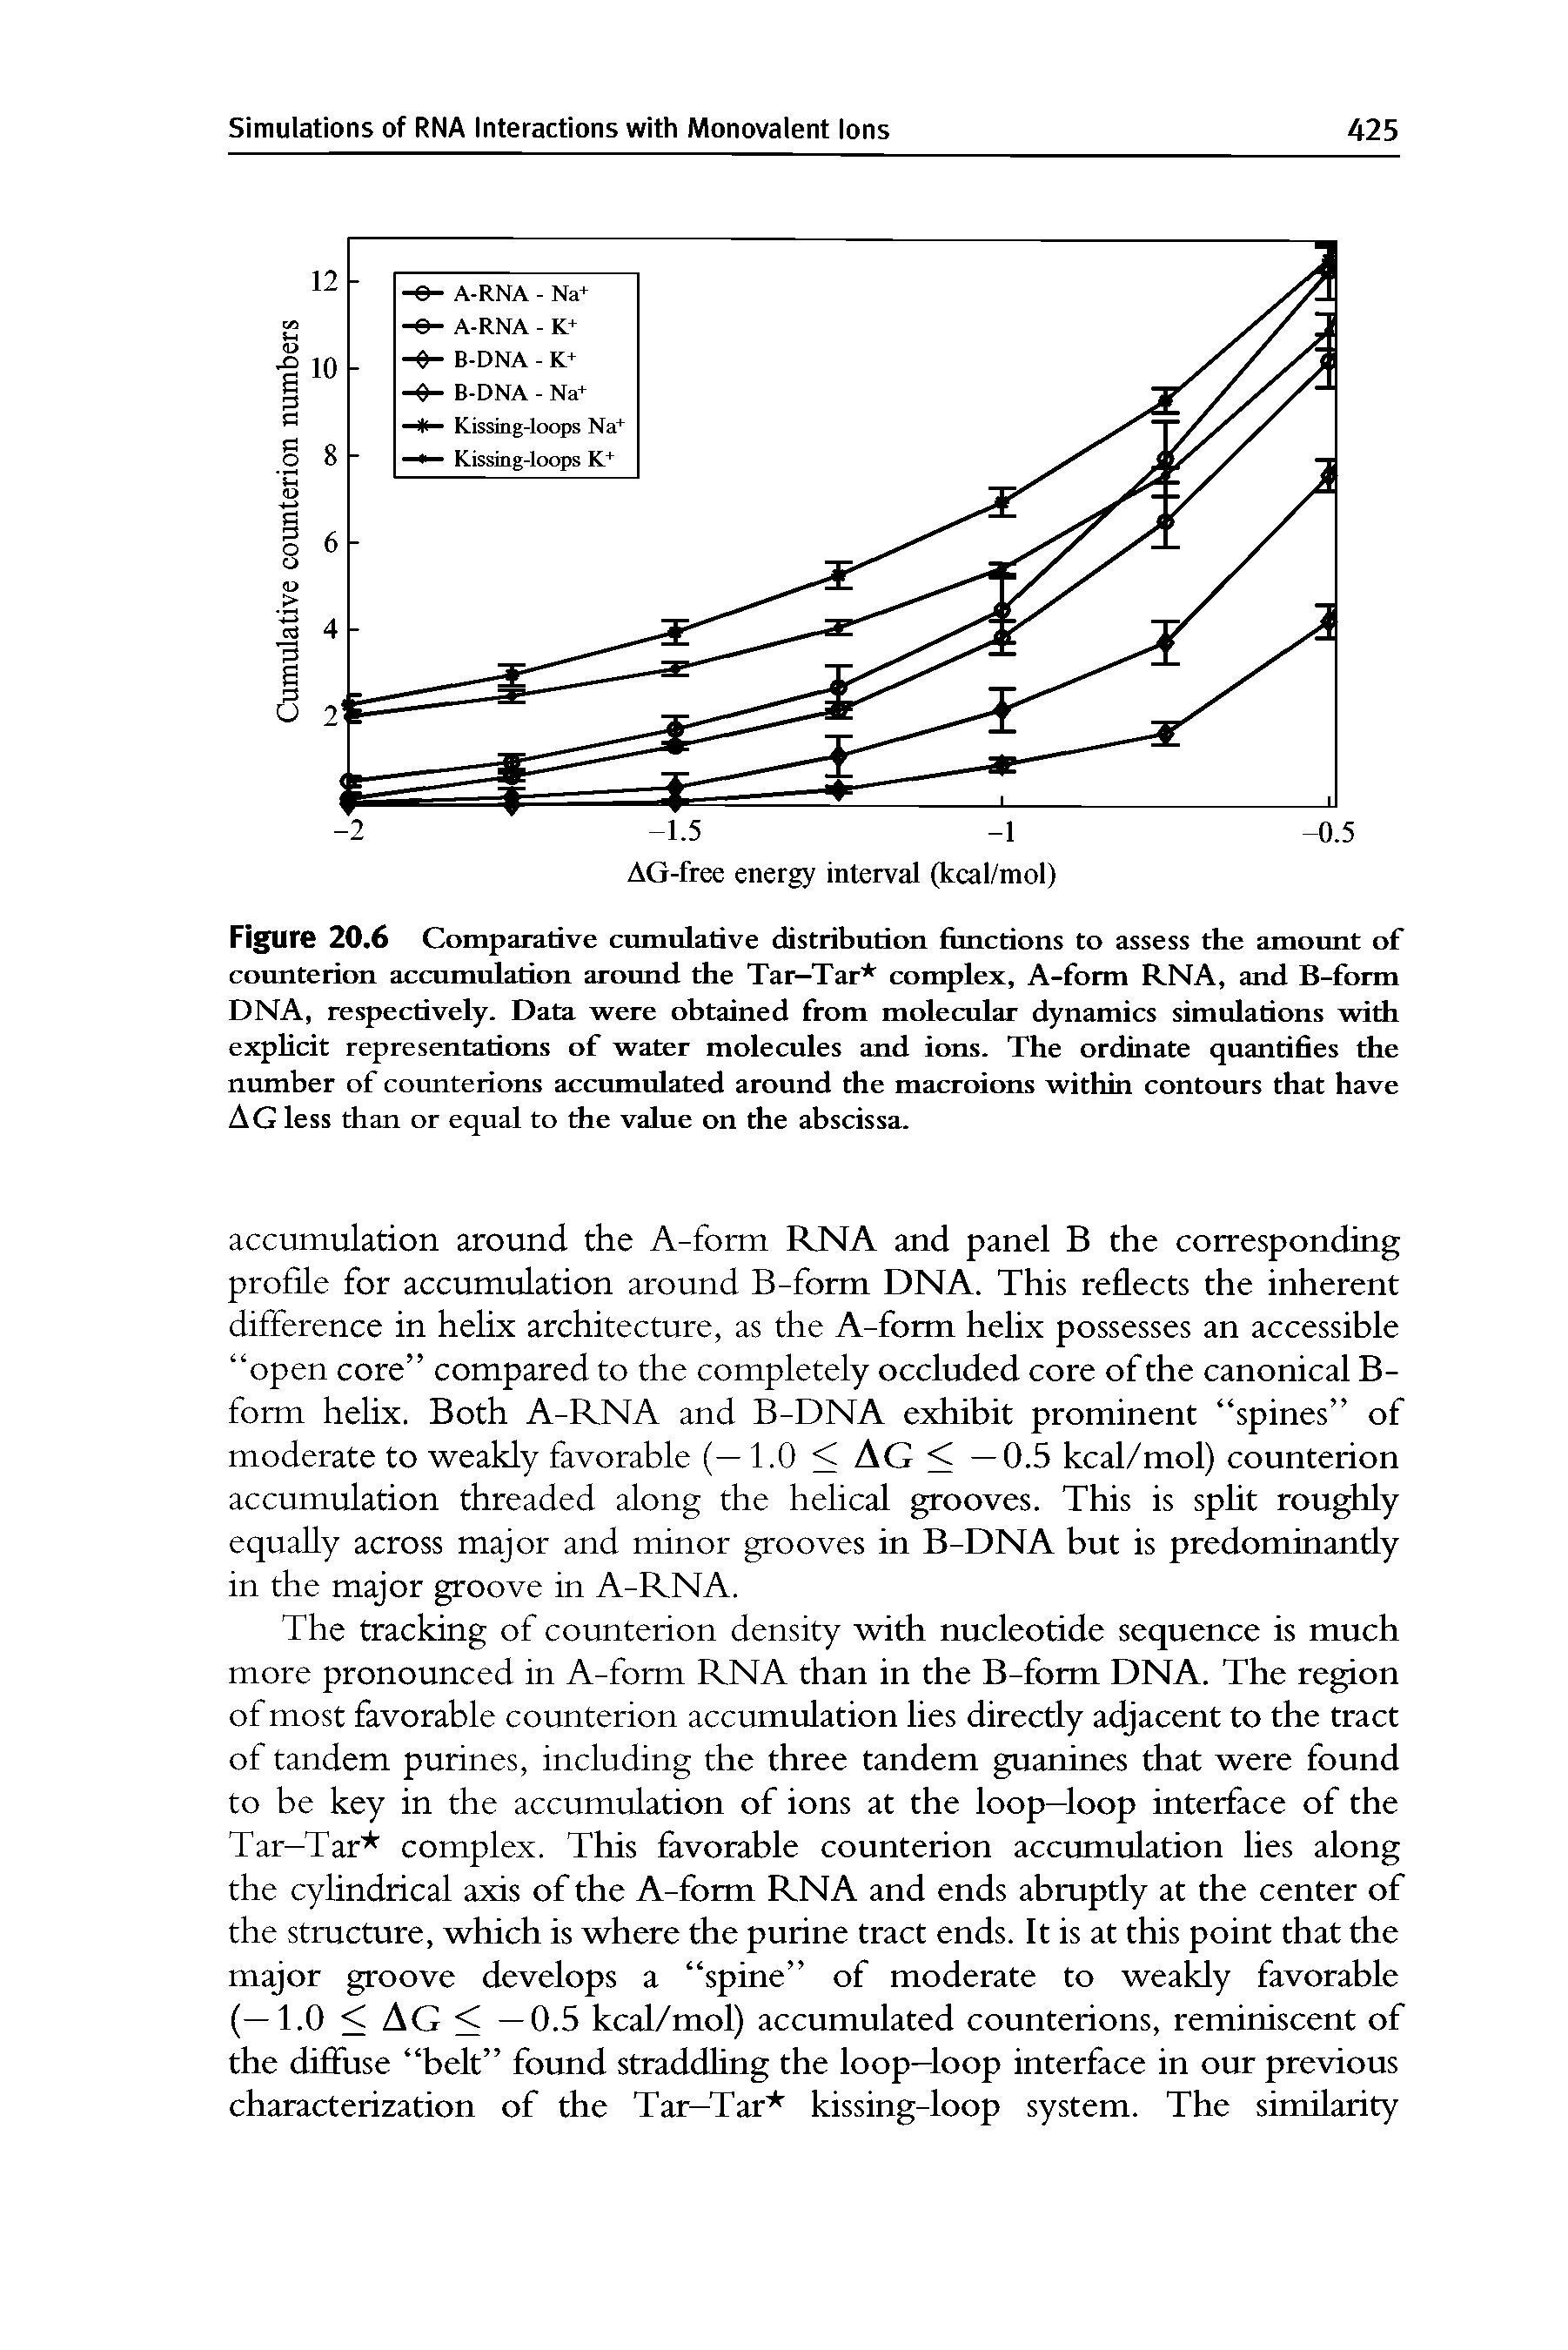 Figure 20.6 Comparative cumulative distribution functions to assess the amount of counterion accumulation around the Tar—Tar complex, A-form RNA, and B-form DNA, respectively. Data were obtained from molecular dynamics simulations with explicit representations of water molecules and ions. The ordinate quantifies the number of counterions accumulated around the macroions within contours that have AG less than or equal to the value on the abscissa.